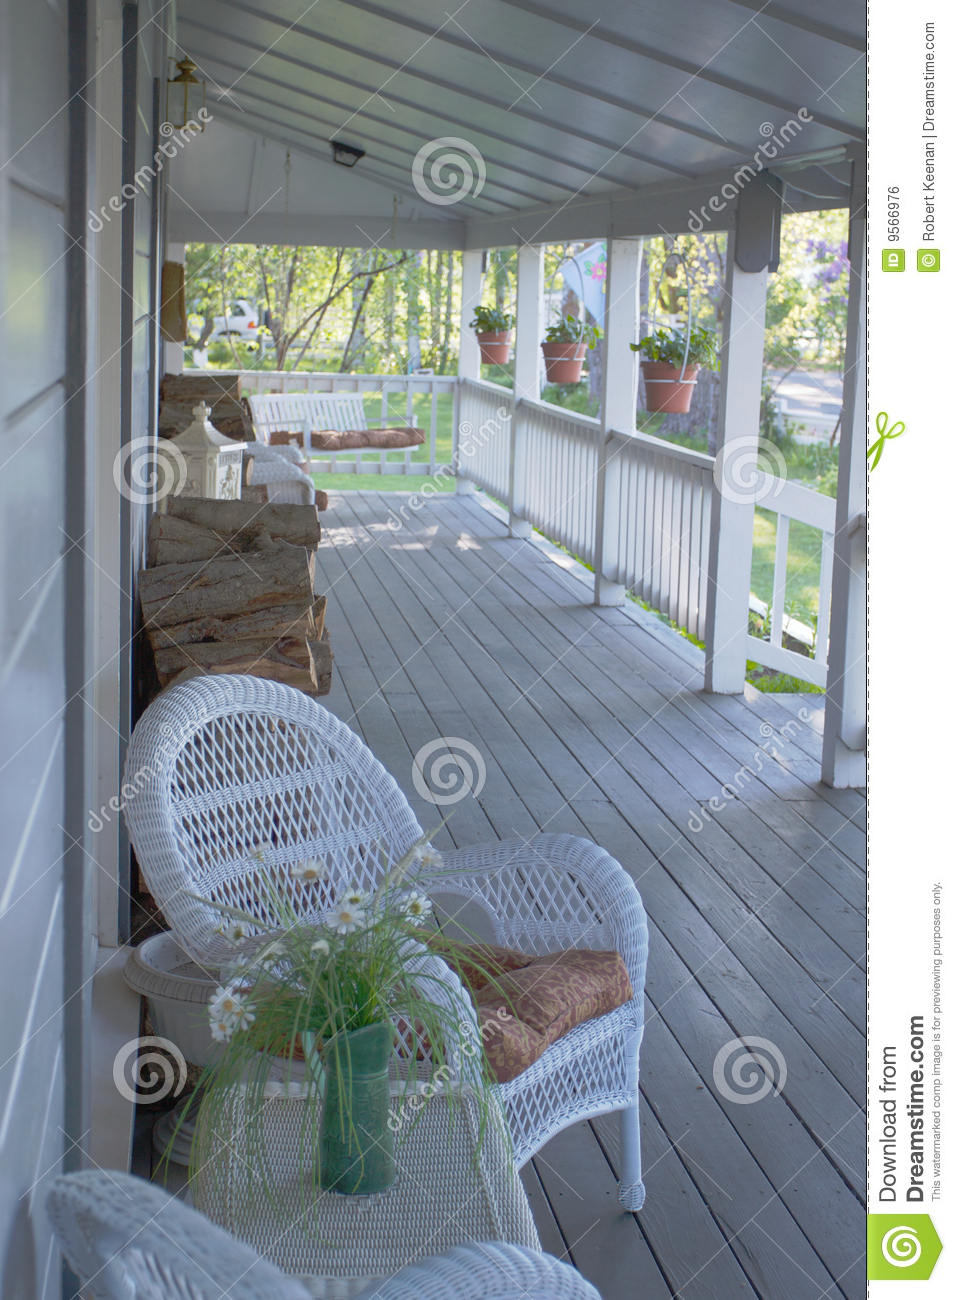 Country Front Porch Royalty Free Stock Image   Image  9566976